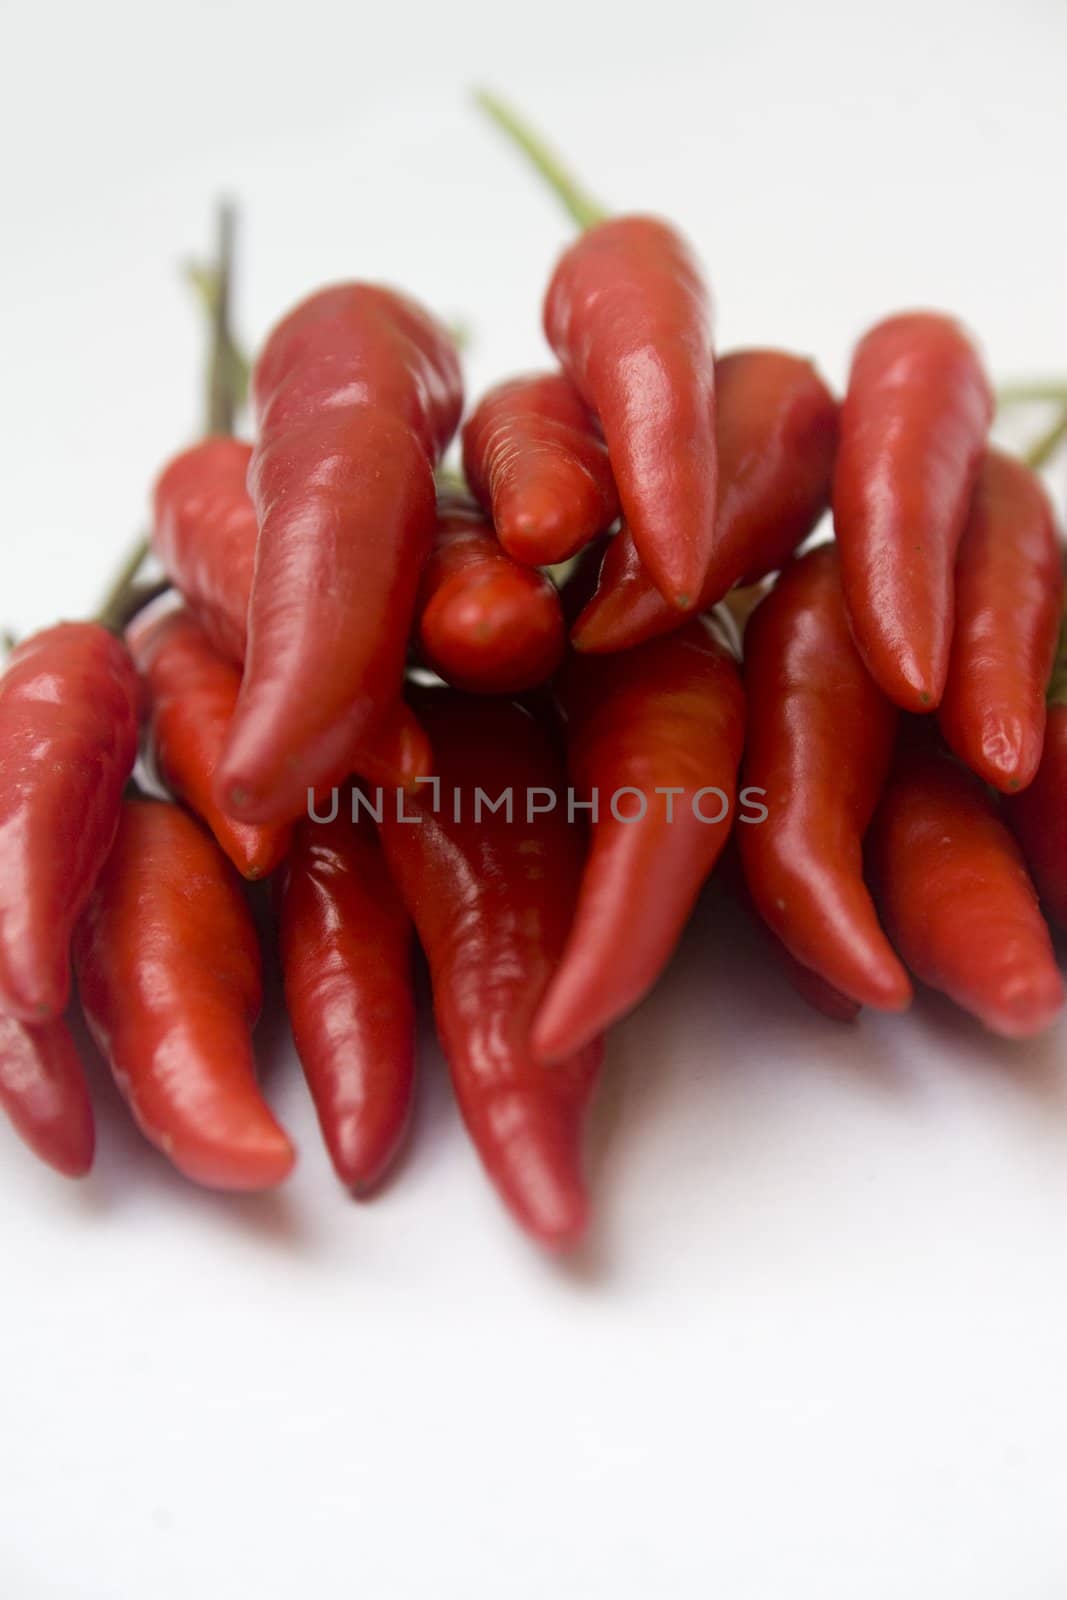 Chili  peppers against white background by timscottrom